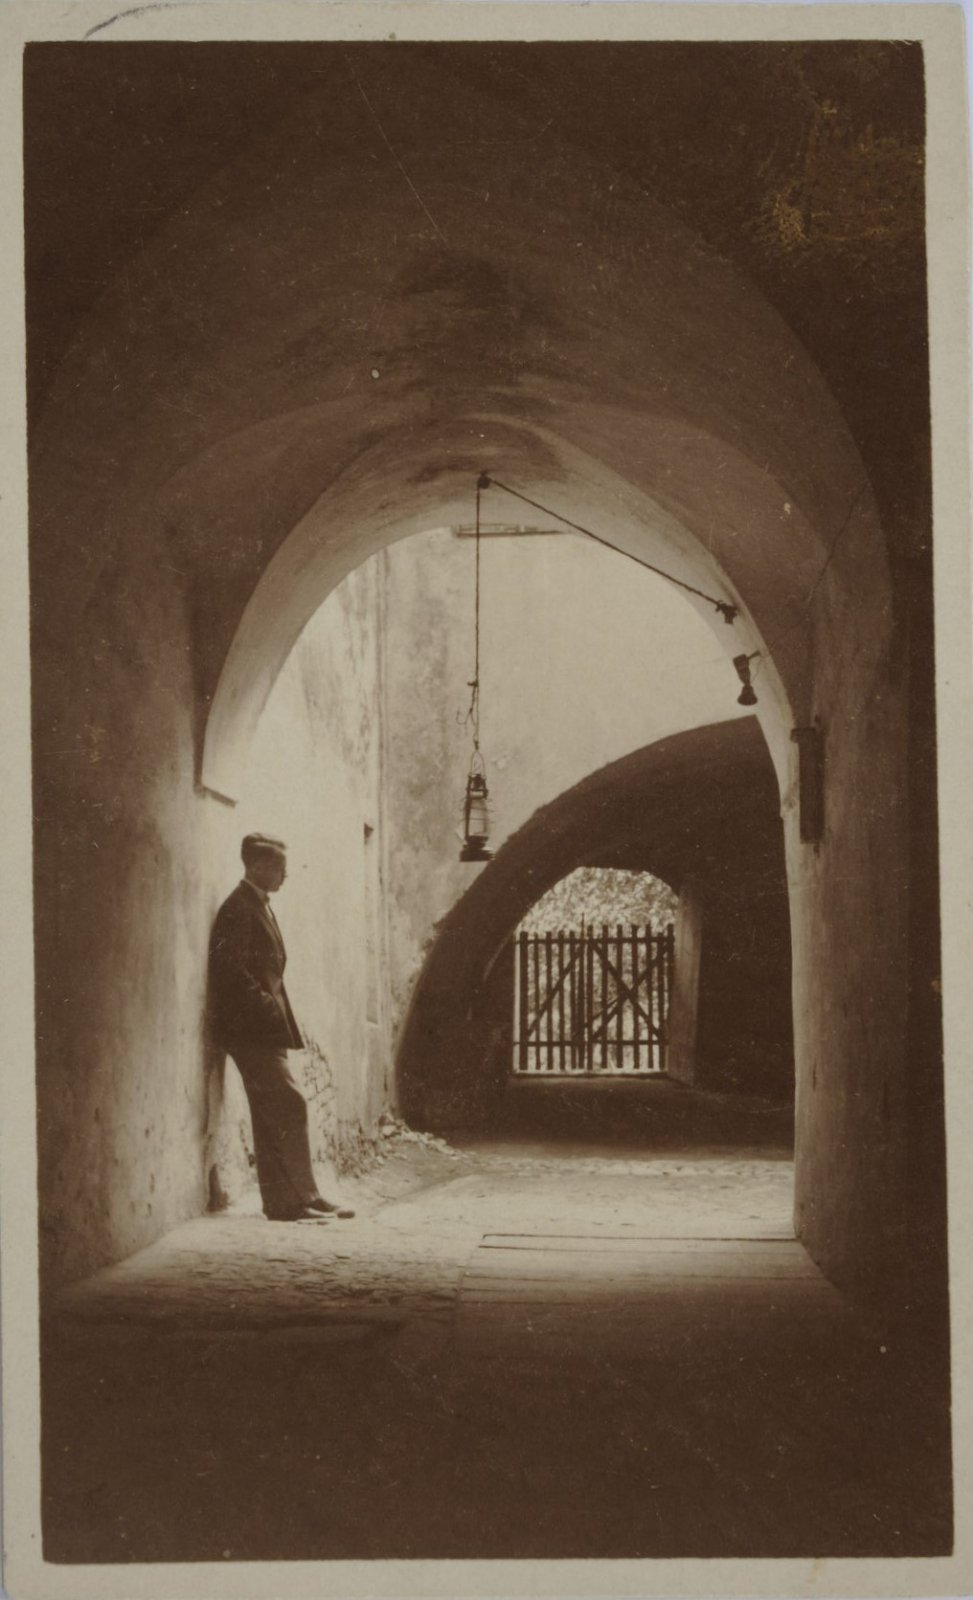 Józef Czechowicz in the gate at 19 Jezuickiej Street (opposite the cinema), black and white photograph, no date, collection of the National Museum in Lublin.